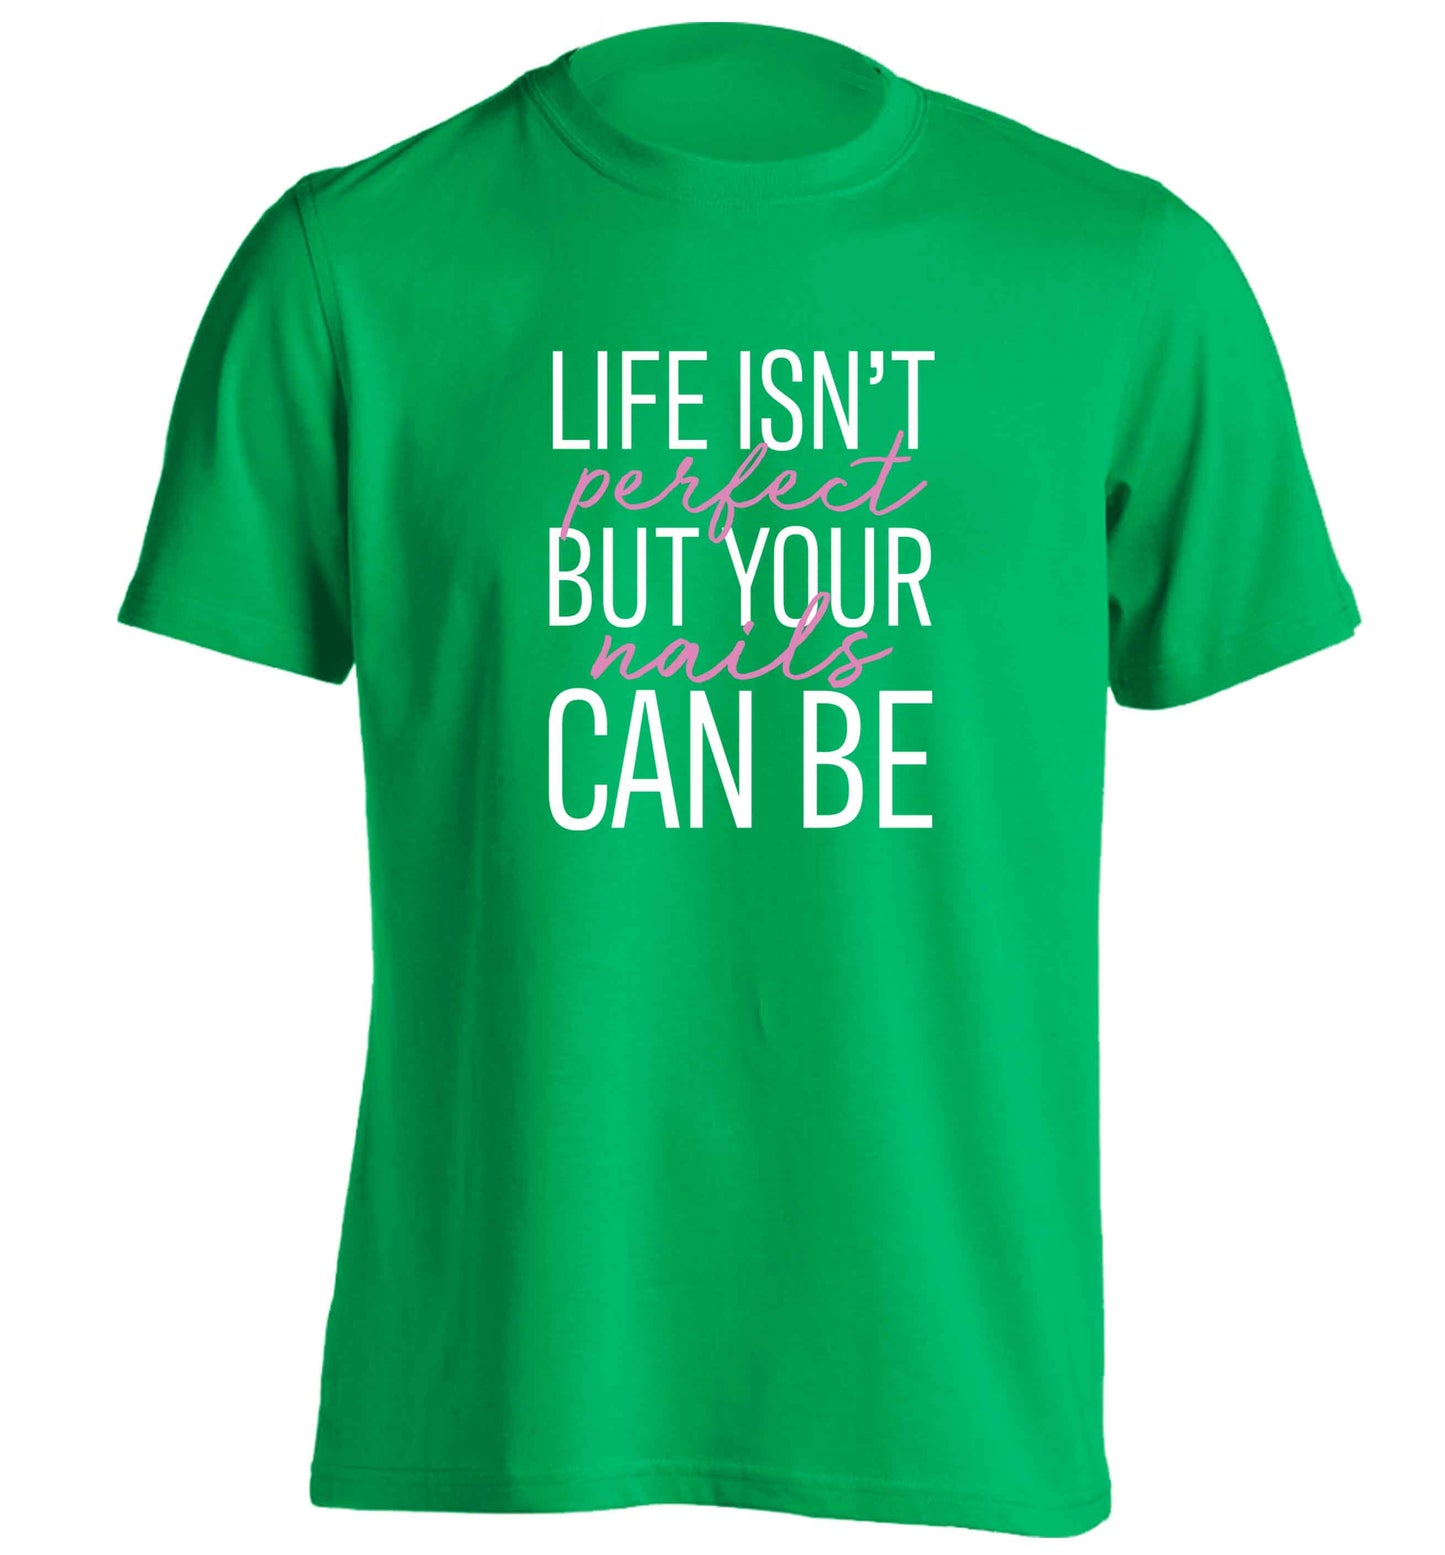 Life isn't perfect but your nails can be adults unisex green Tshirt 2XL